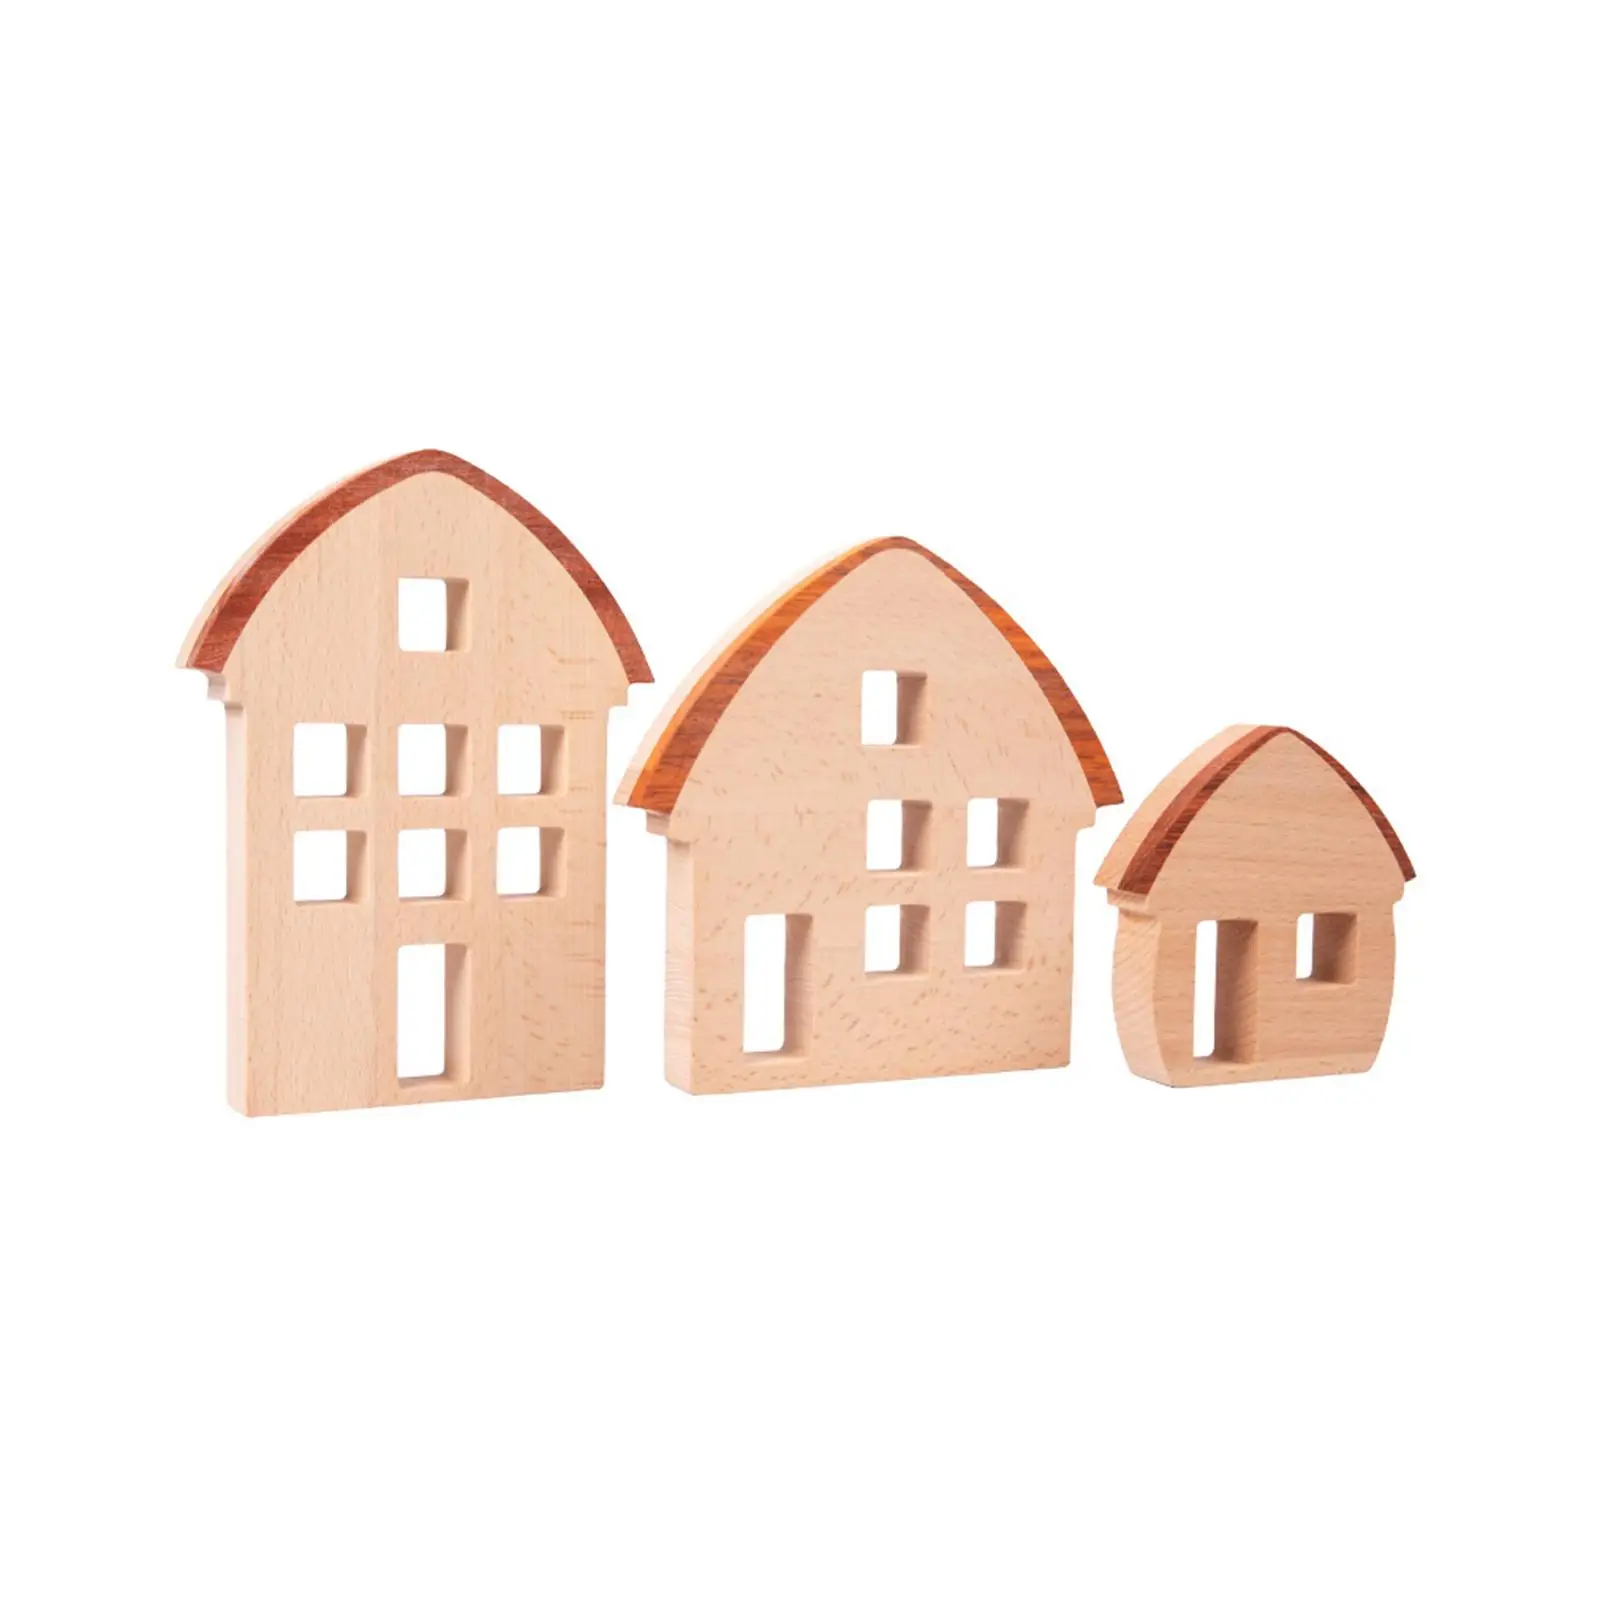 3Pcs Wood House Wood Wooden Sign Block for Boys Girls Party Favors Ages 3-6